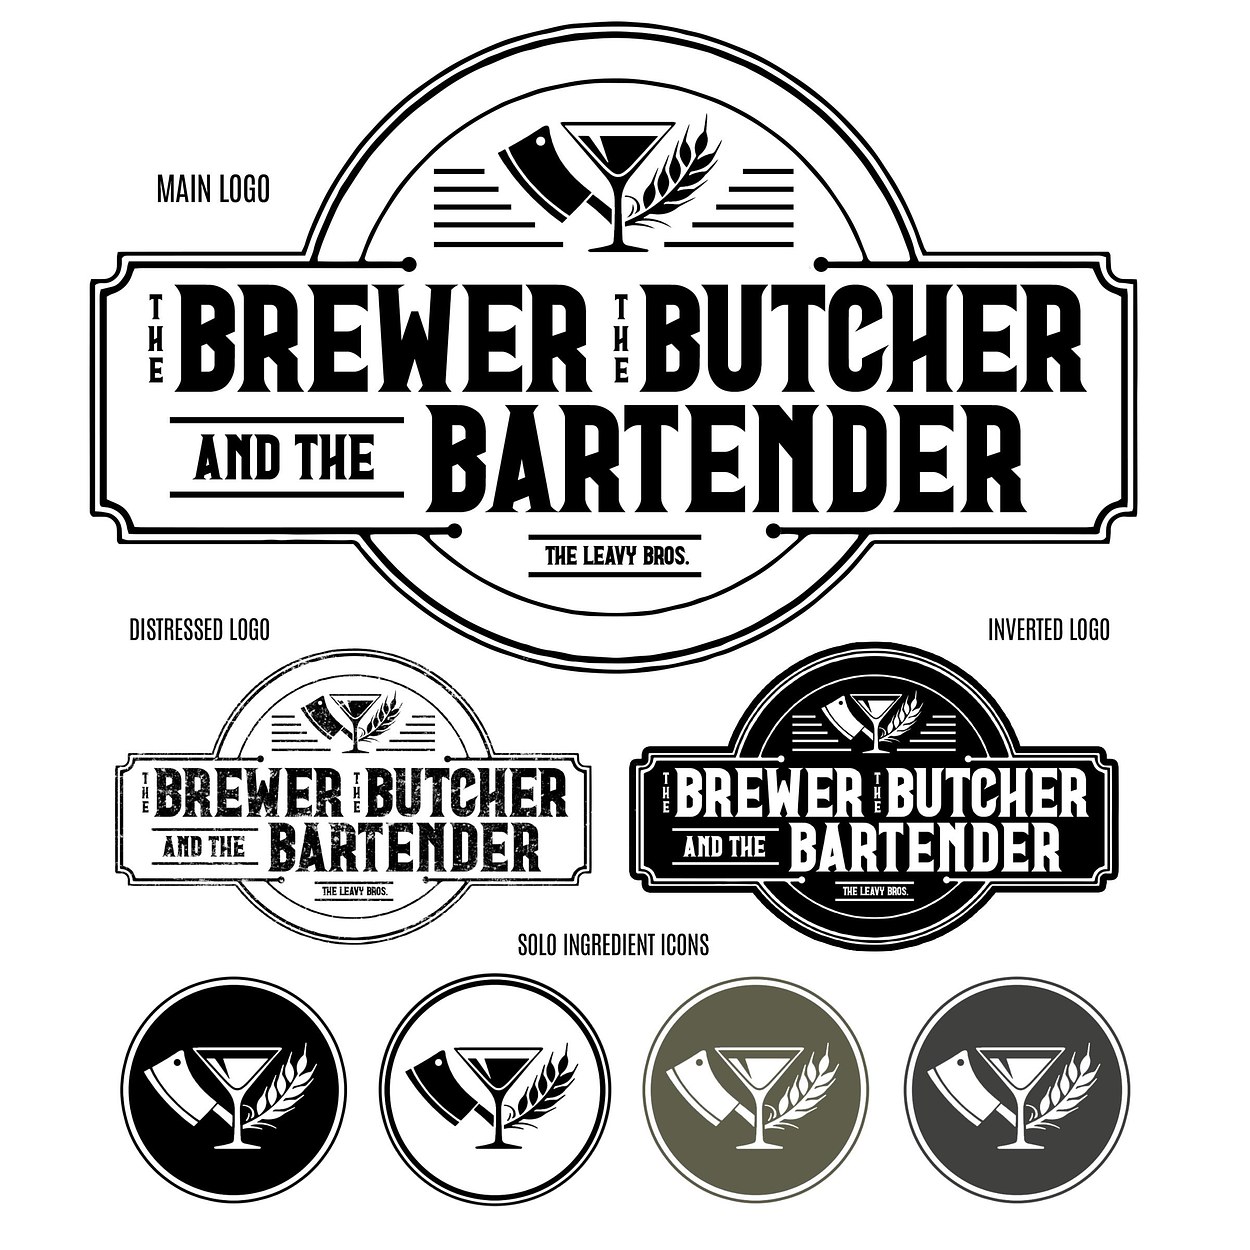 The Leavy Brothers - Brewer Butcher Bartender Branding